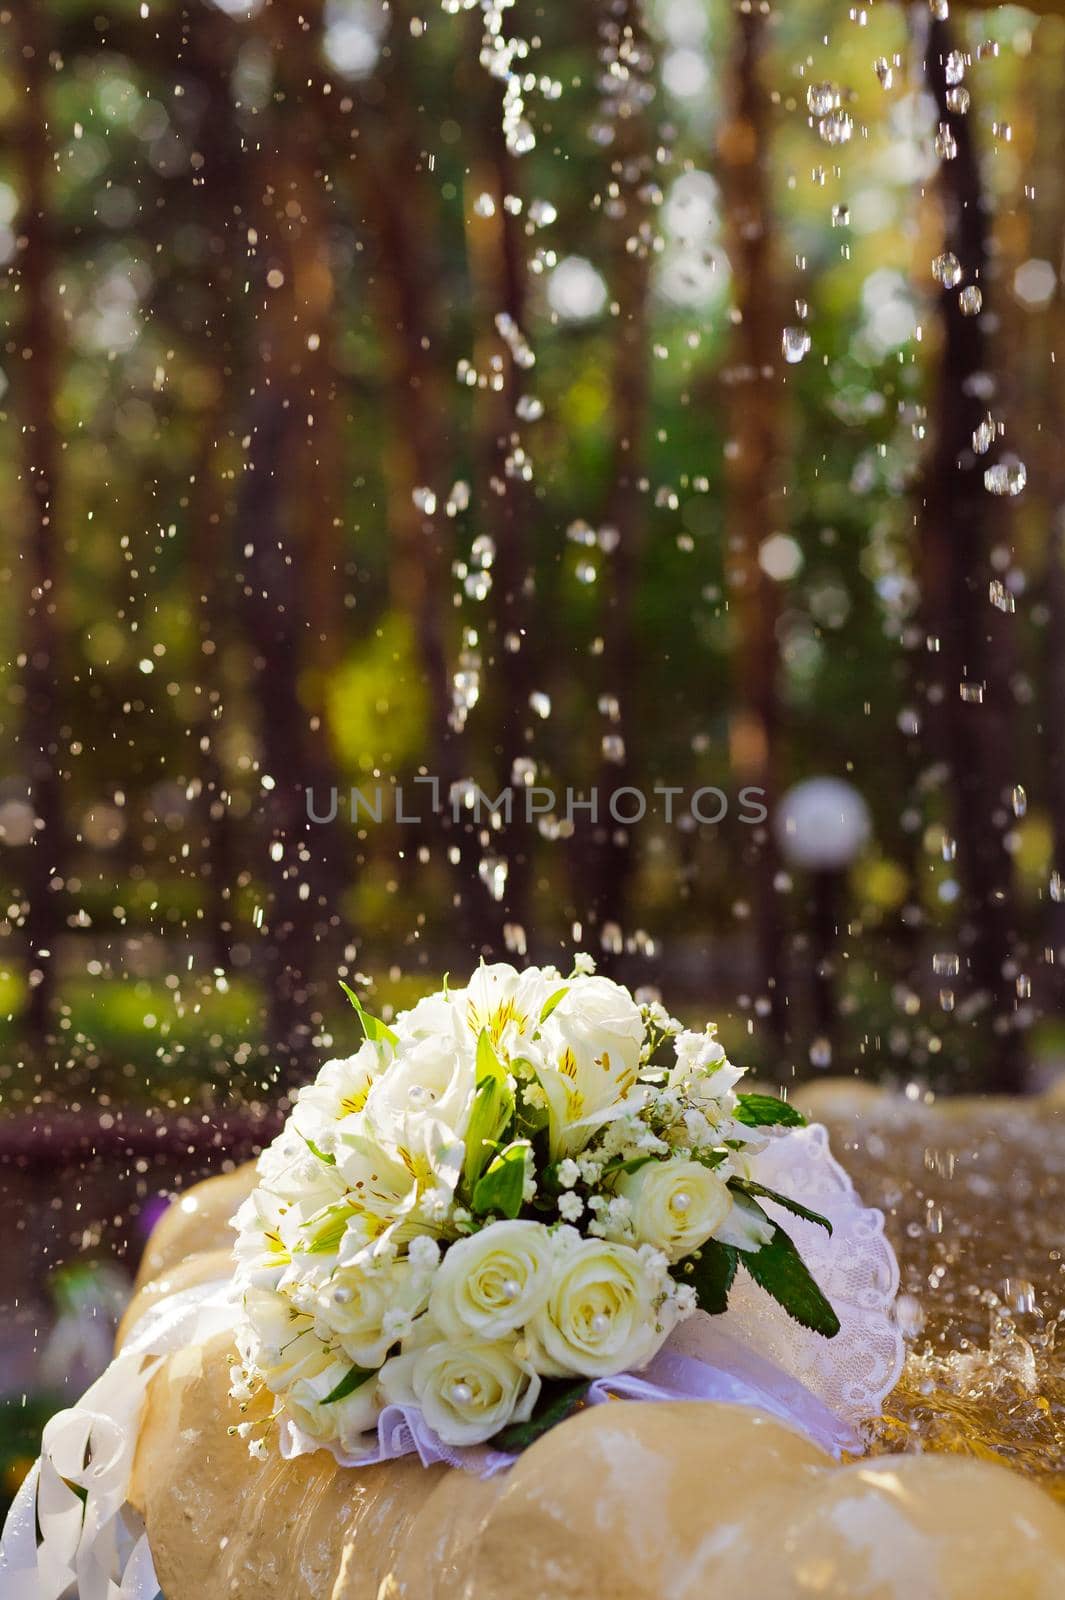 The Wedding Bridal Bouquet Of White Roses Lies In An Old Fountain Under Splashes And Drops Of Water. by Andrii_Ko